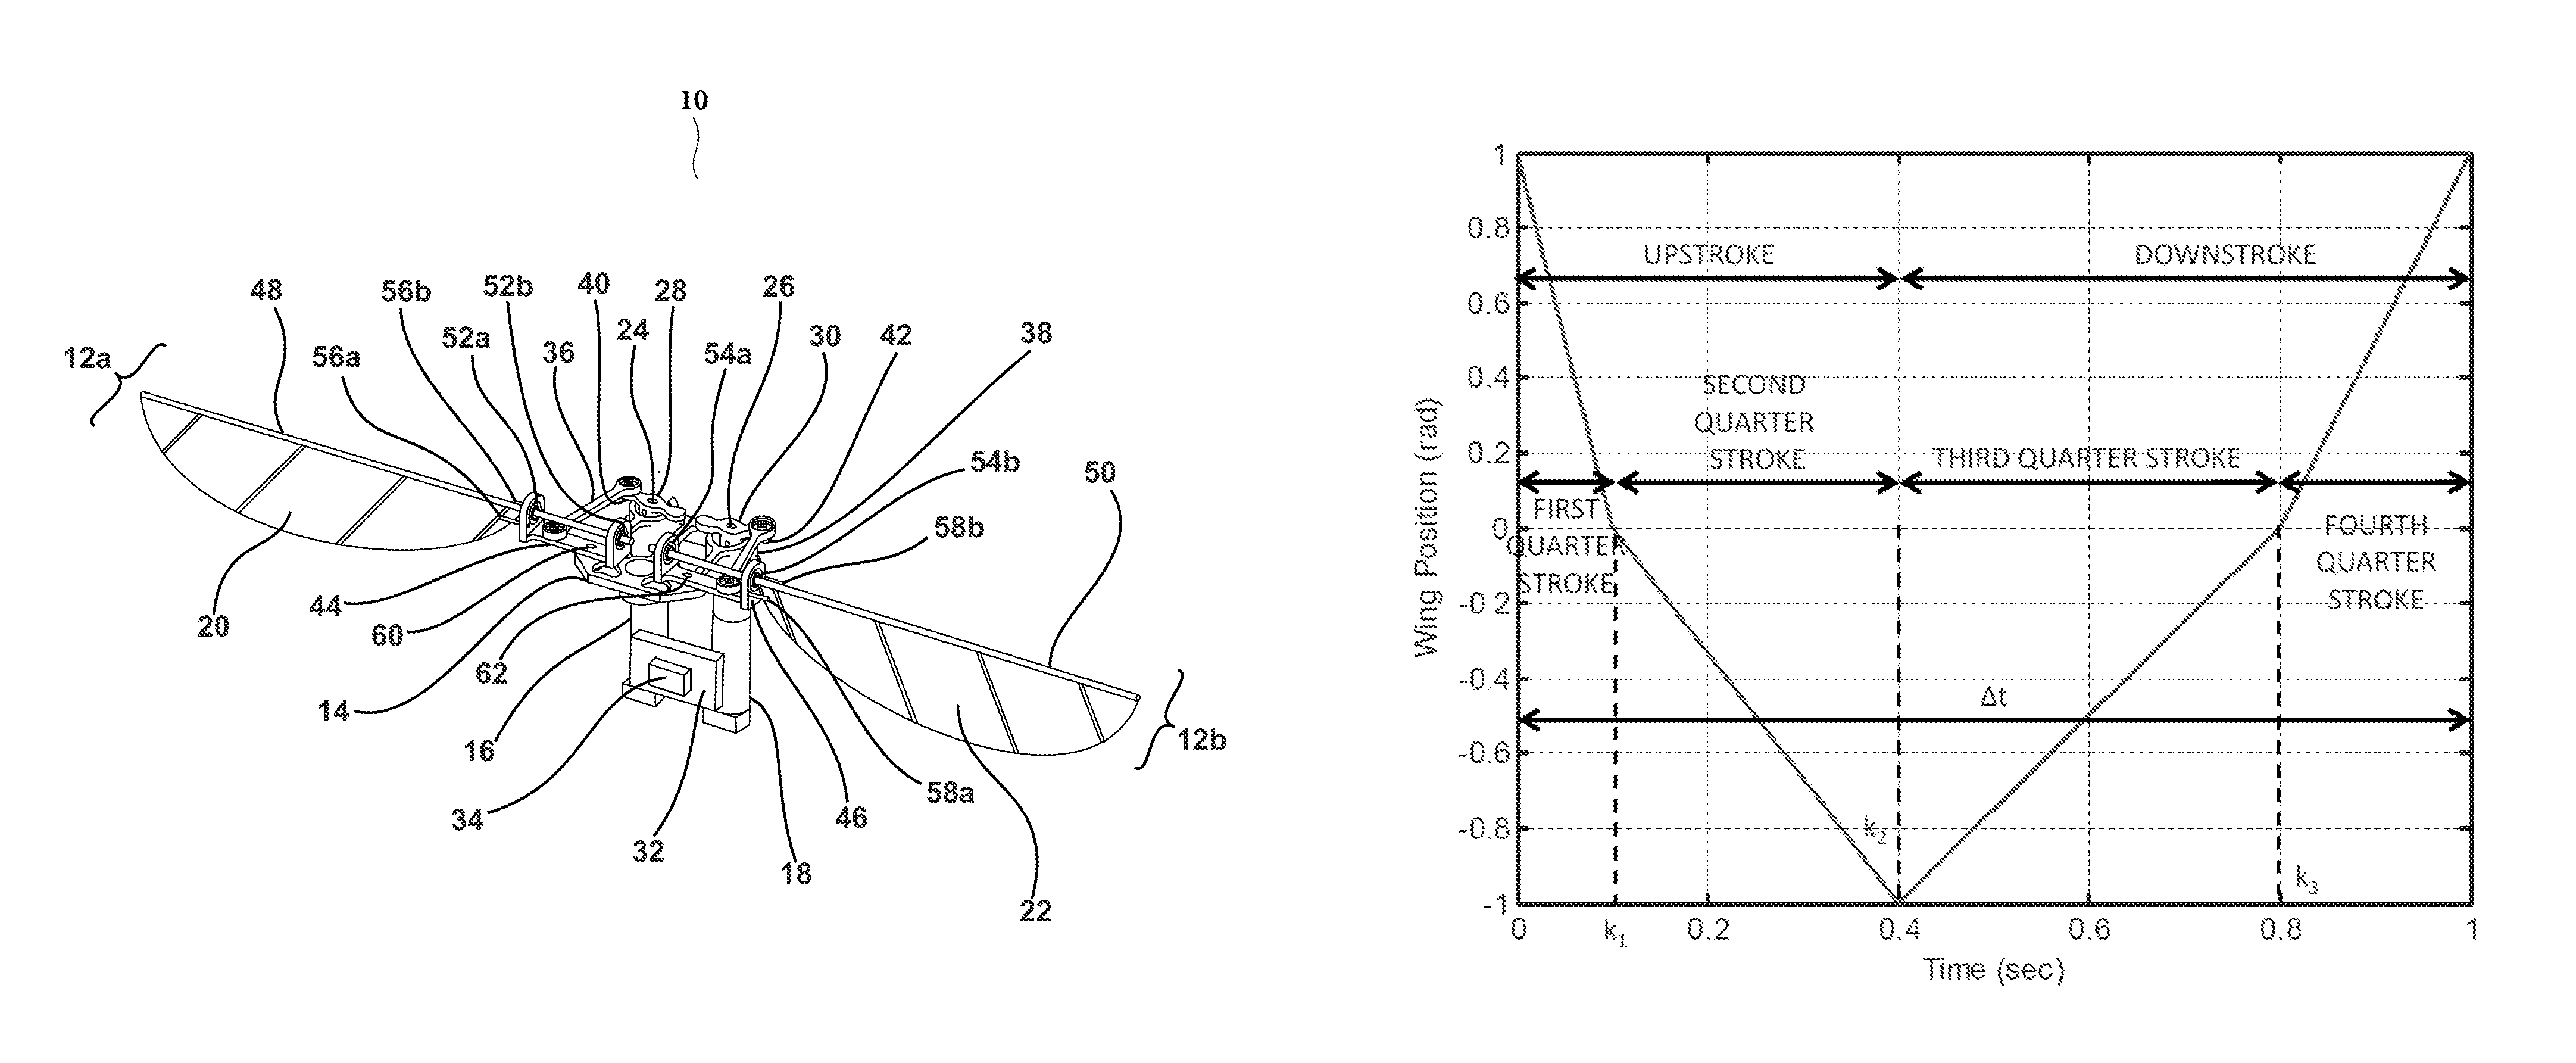 Methods and apparatus to achieve independent six degree control of flapping wing micro air vehicle